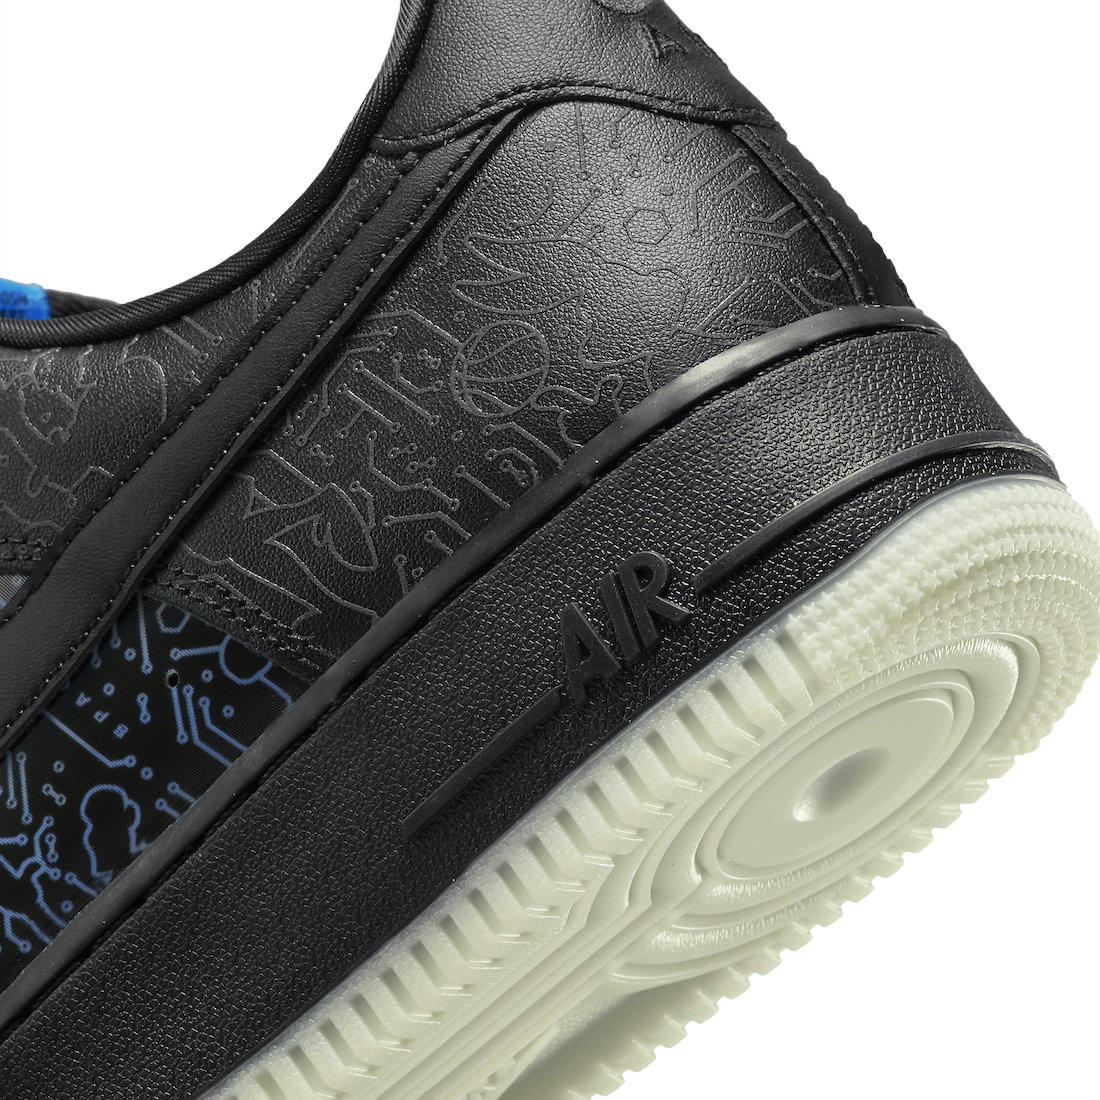 Space Jam x Nike Air Force 1 Computer Chip Sneakers 